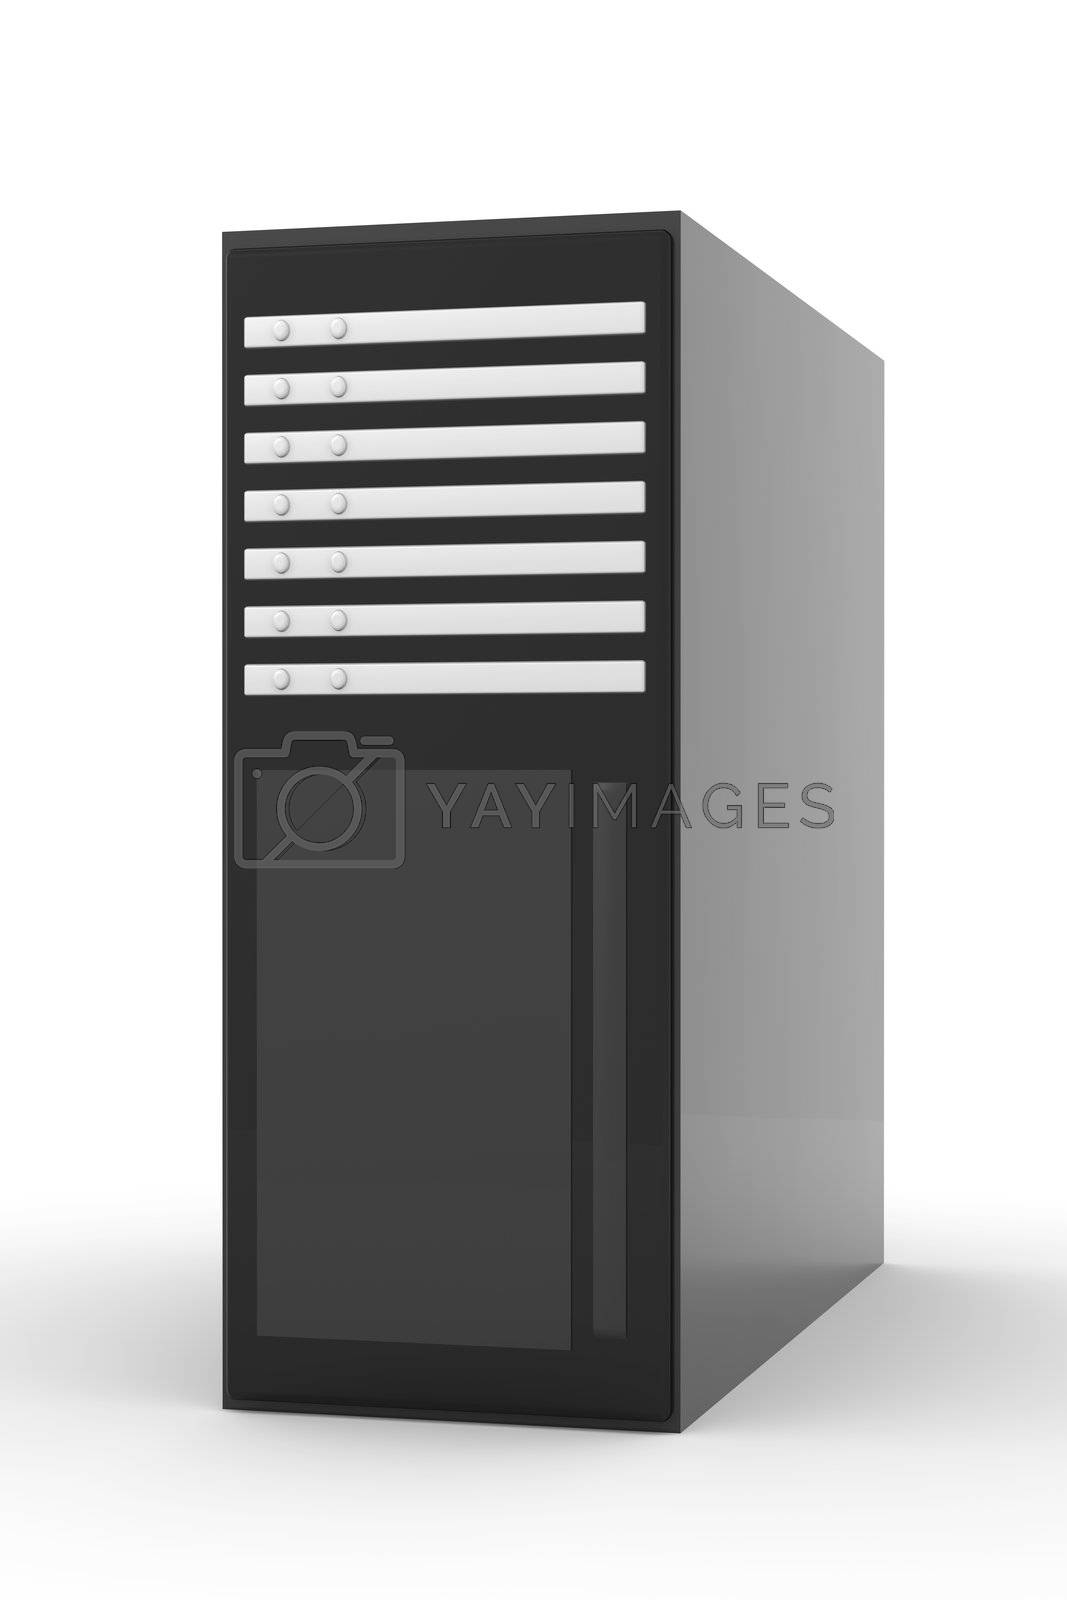 Royalty free image of 19inch Server tower by Spectral